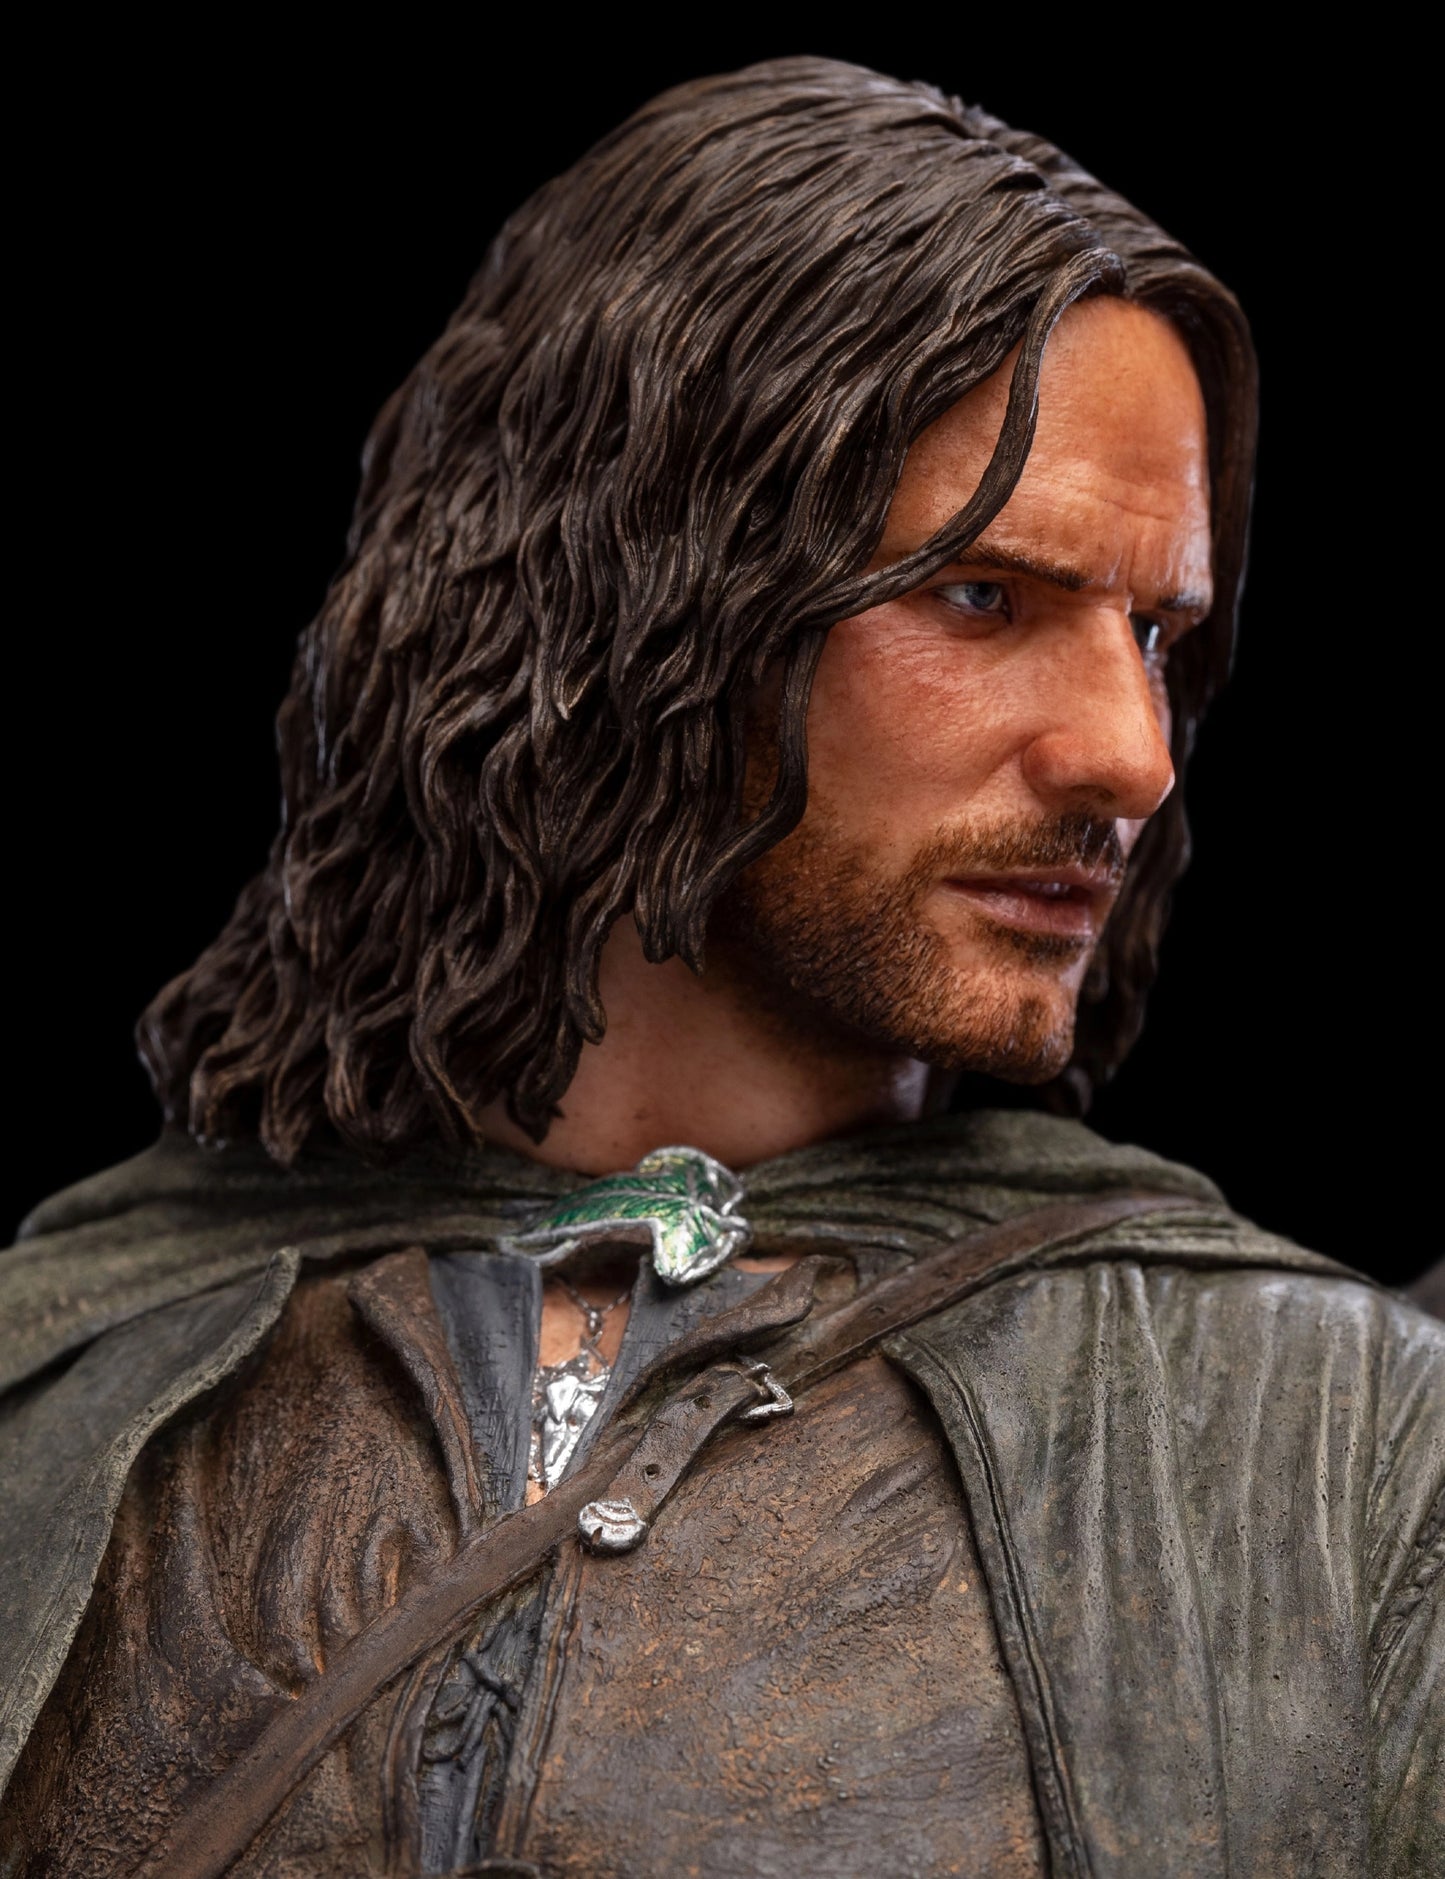 Top 5 MTG Lord of the Rings Aragorn cards for Commander, ranked